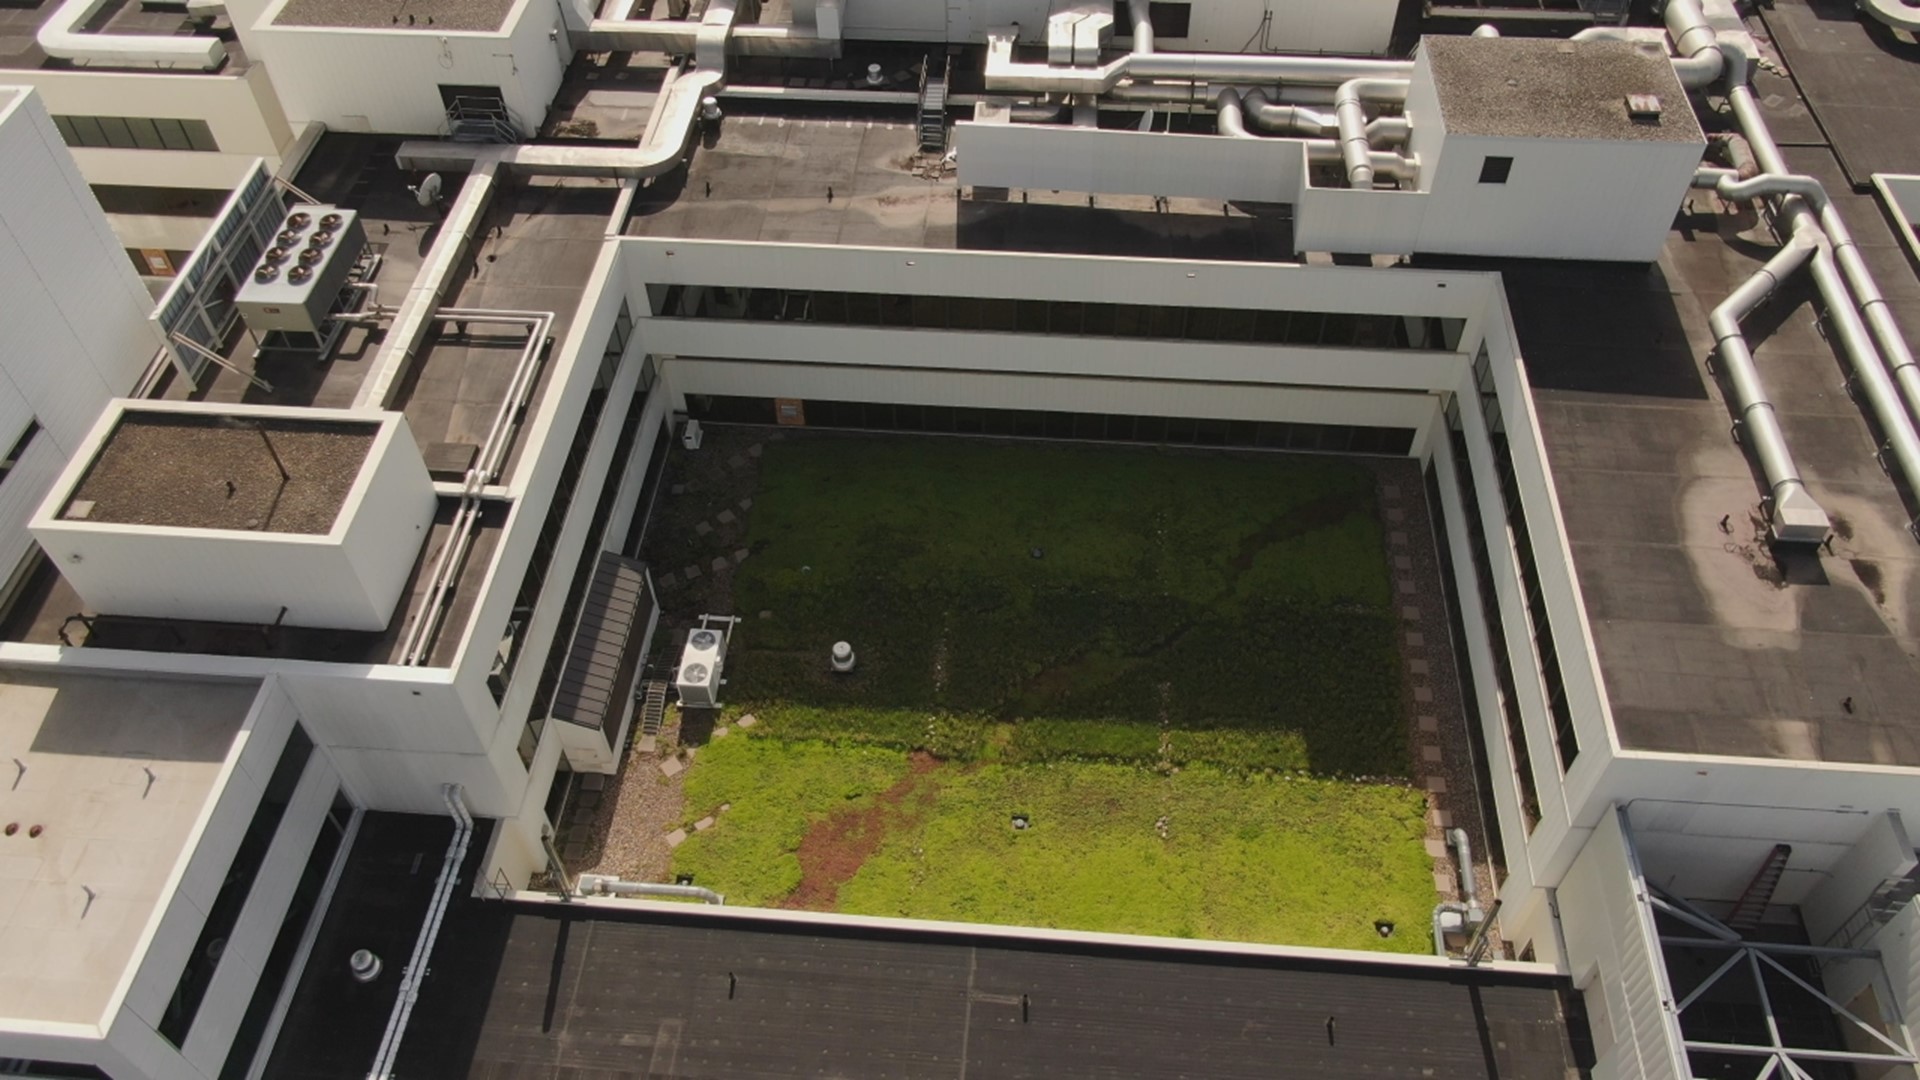 Since 2010, around 50 patient rooms at Genesis East Hospital have overlooked a rooftop garden. Now, the hospital wants to build a second green roof.